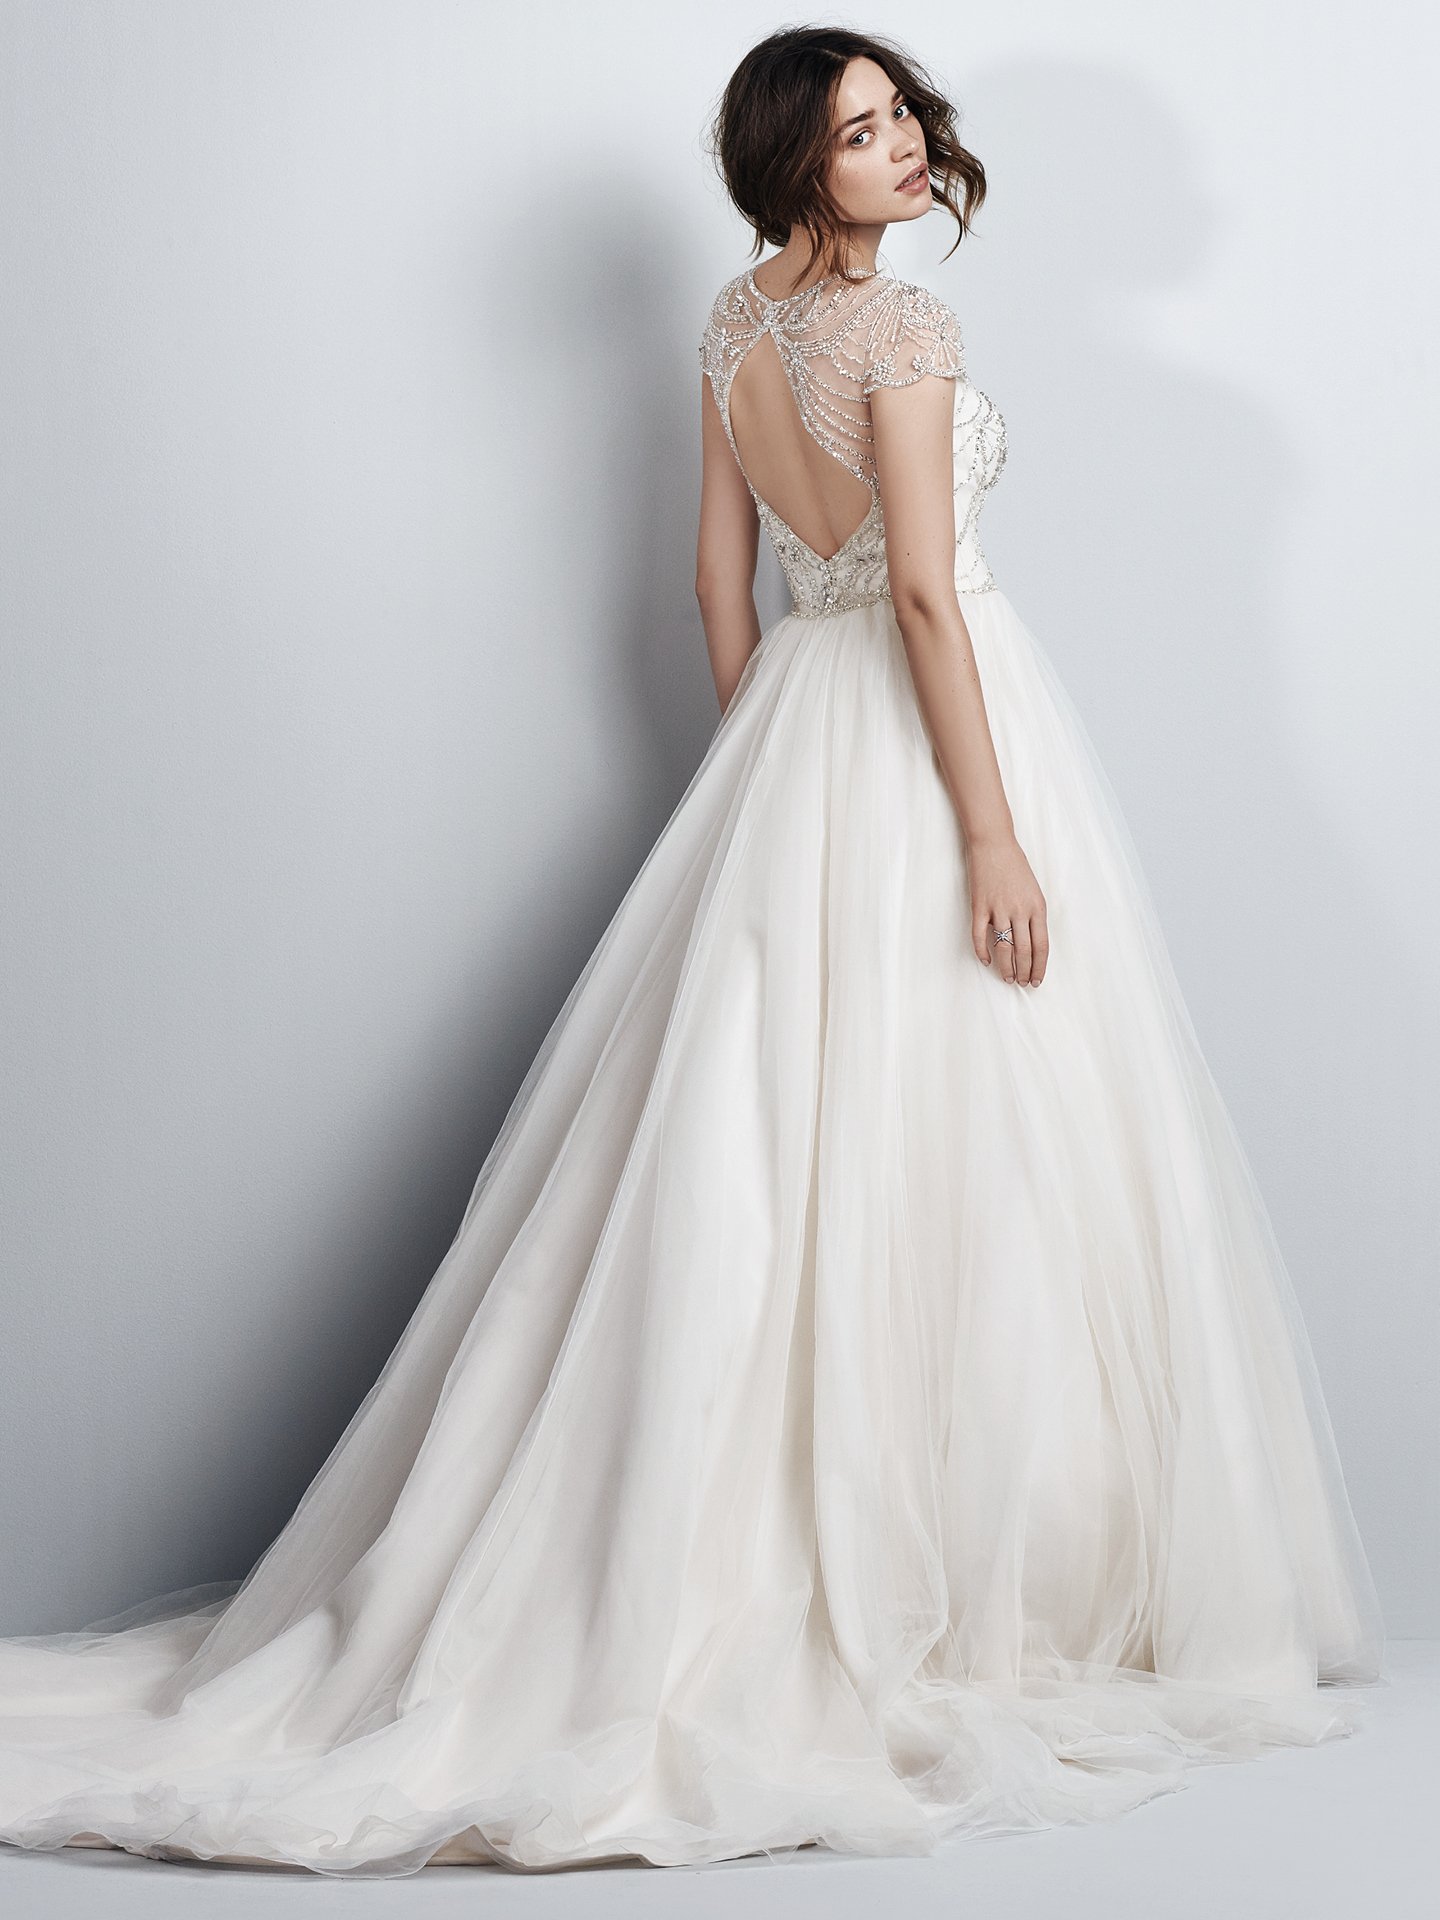 Vintage-inspired ball gown wedding dress with fully beaded bodice Emery by Sottero and Midgley. Modern Royalty: Wedding Dresses Inspired by the Royal Engagement